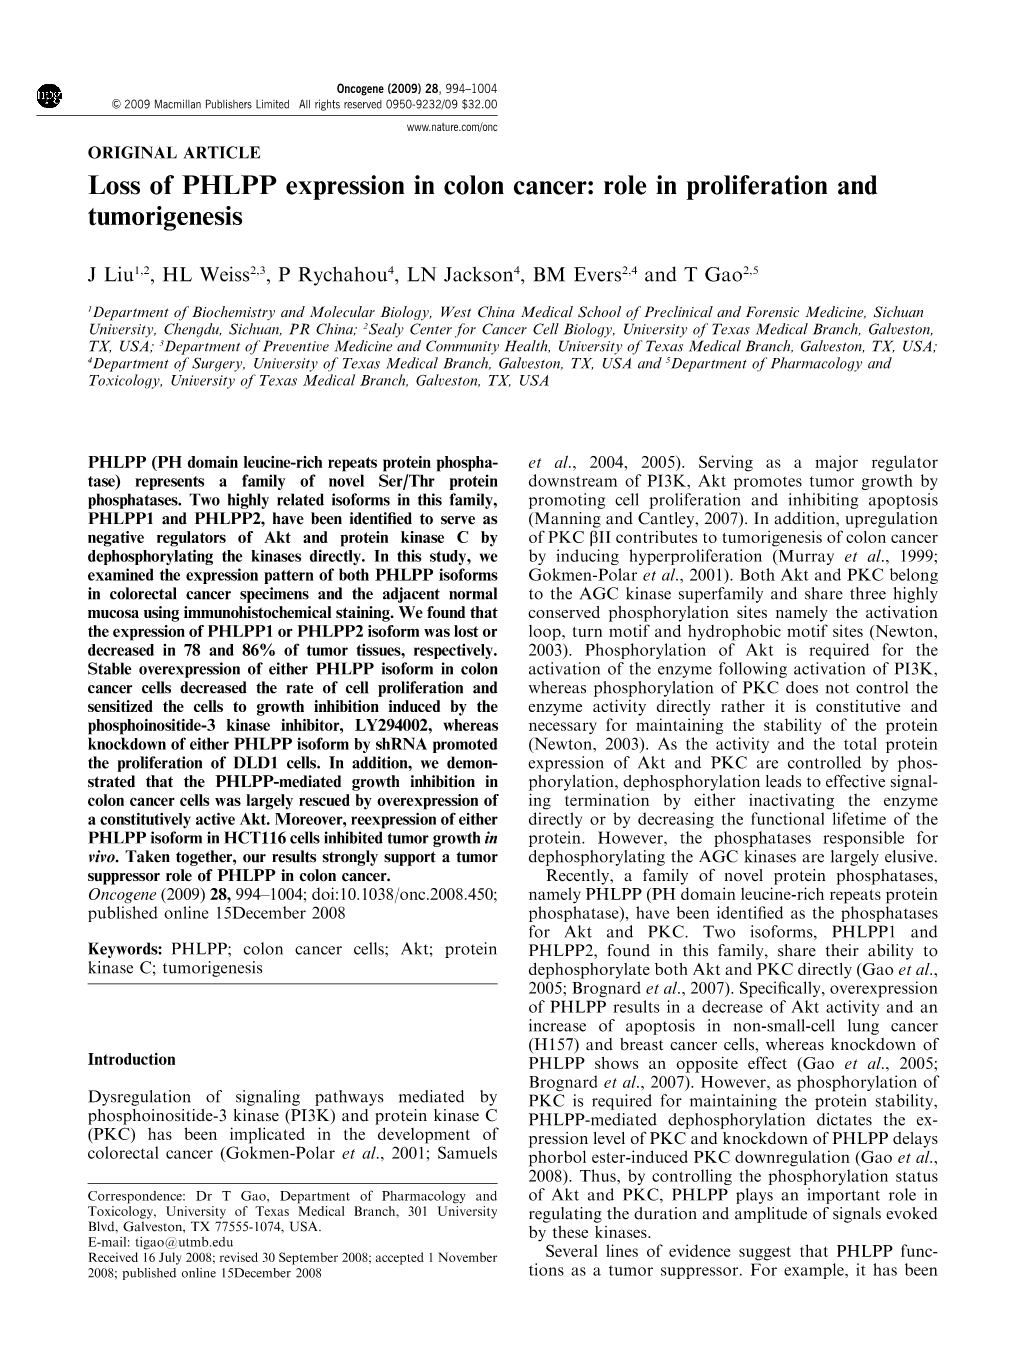 Loss of PHLPP Expression in Colon Cancer: Role in Proliferation and Tumorigenesis